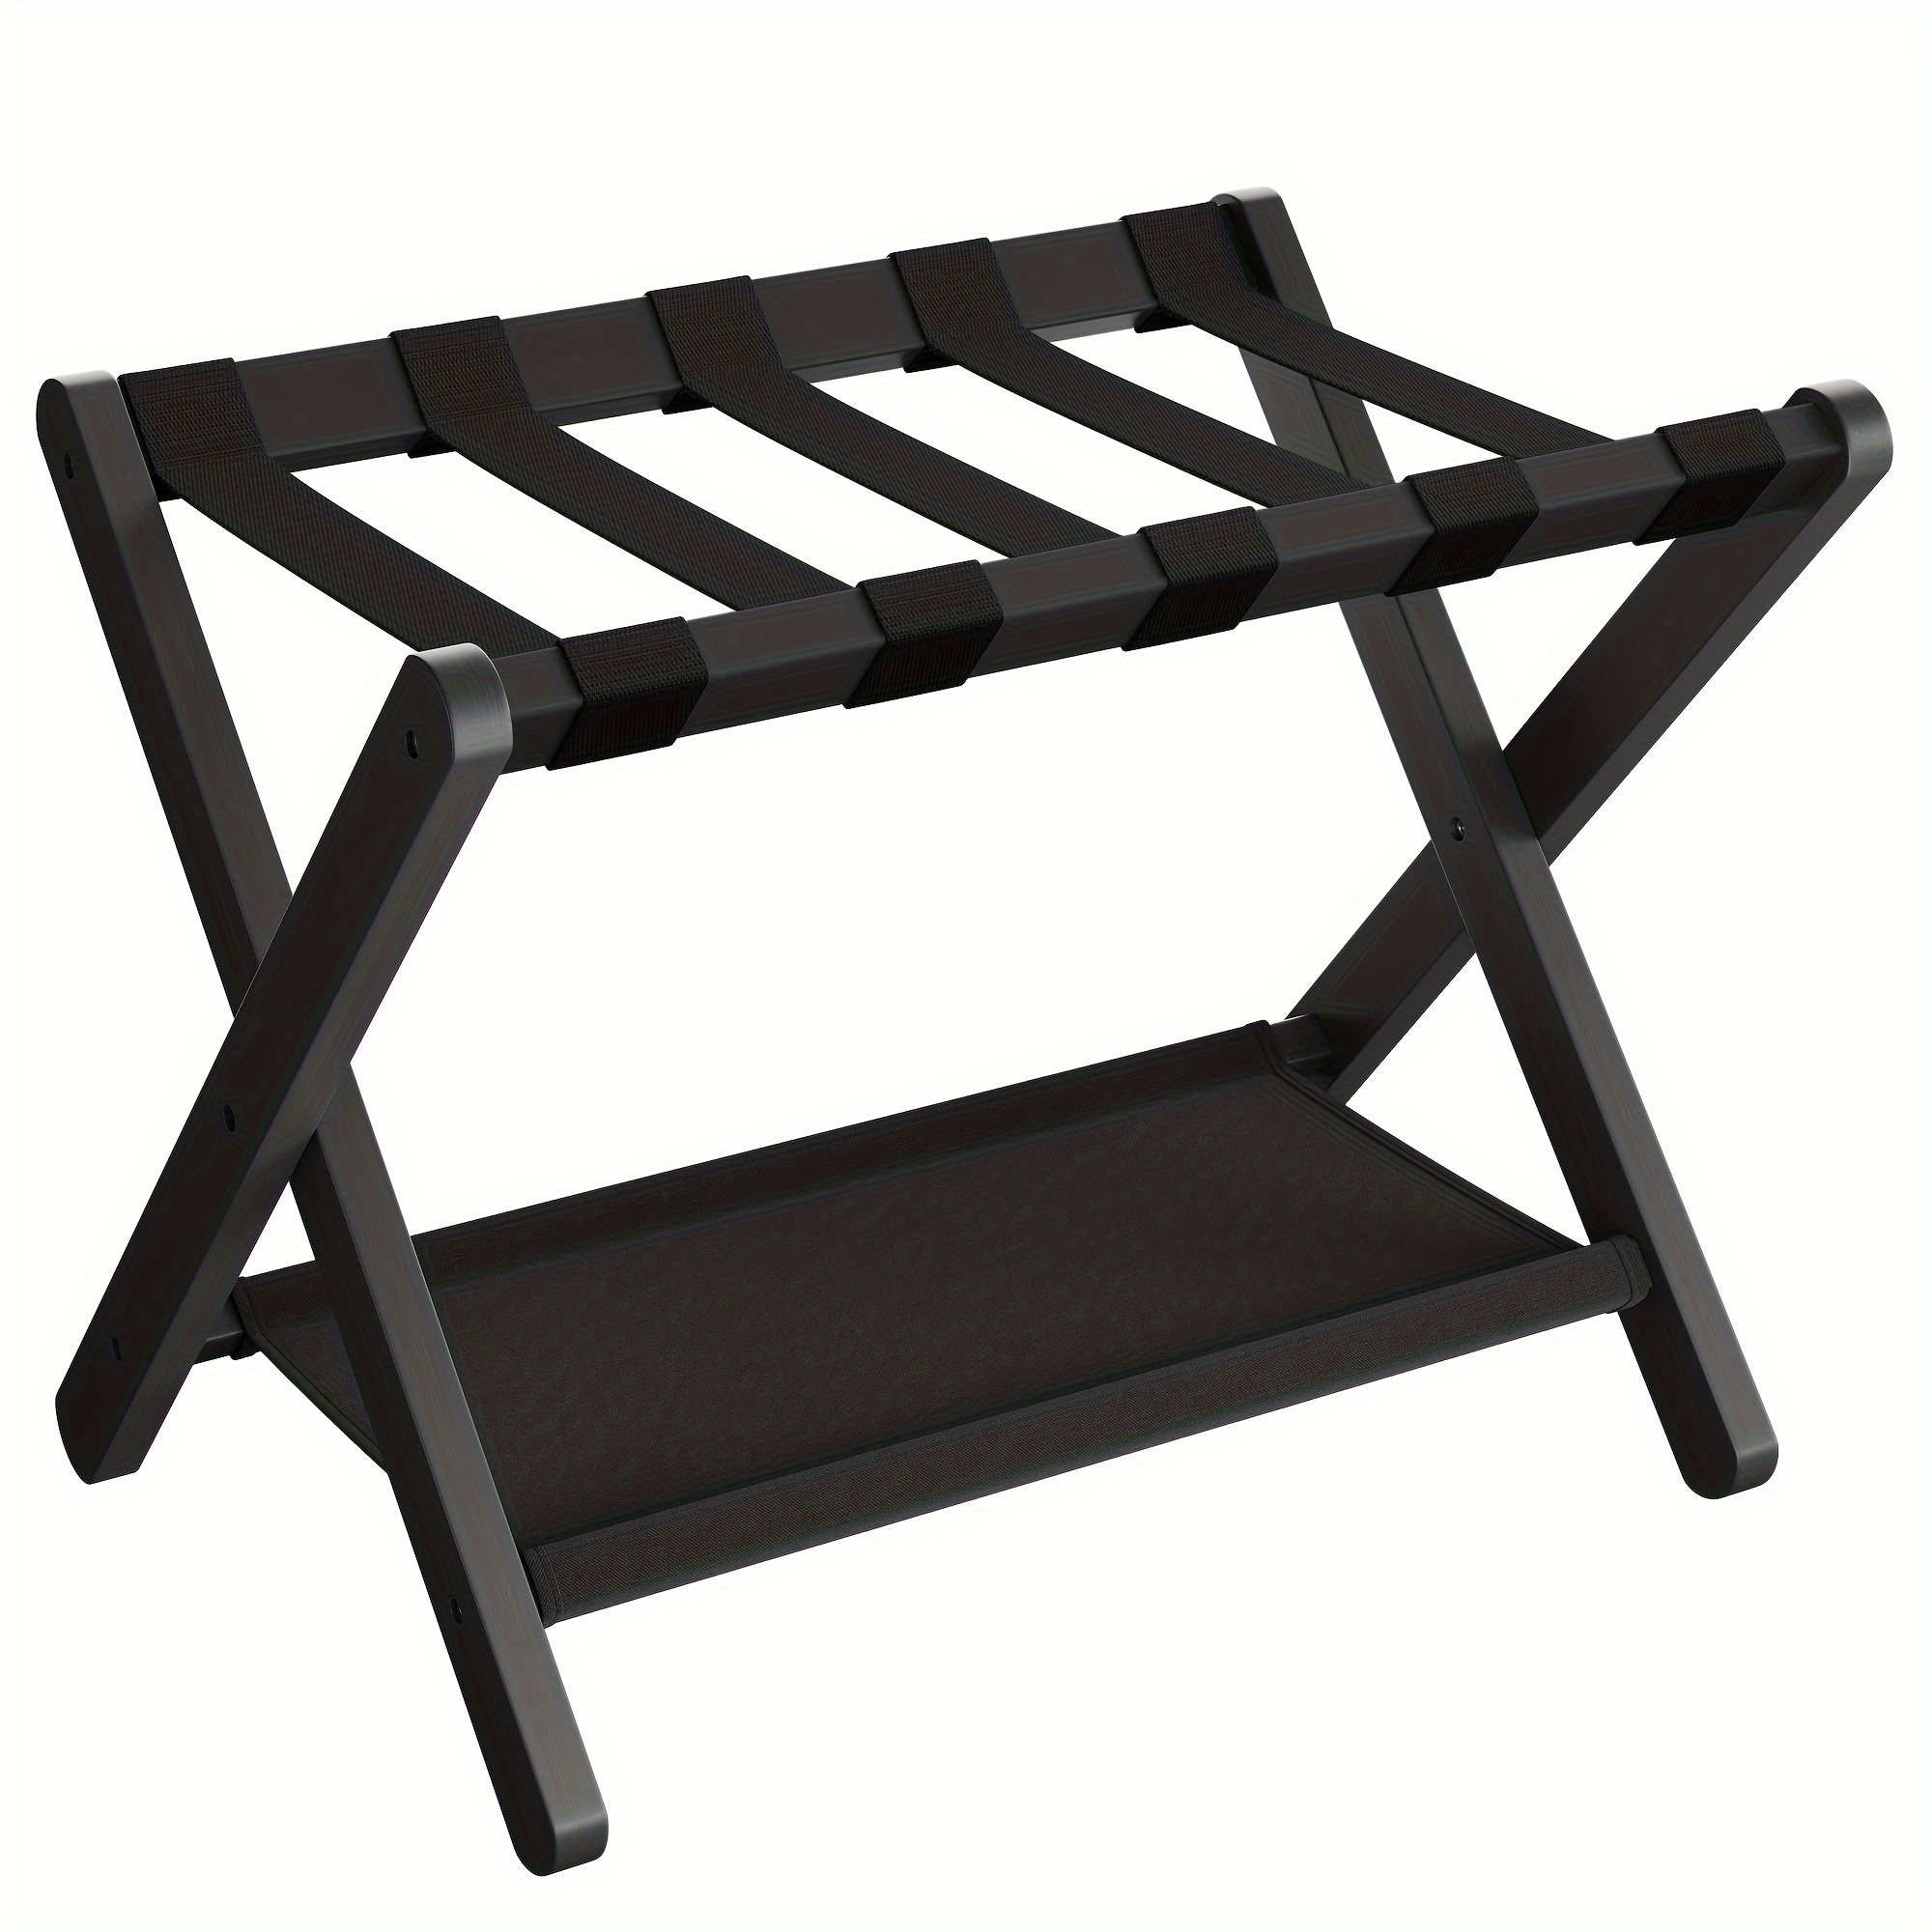 

Songmics Luggage Rack, Folding Suitcase Stand With Storage Shelf, For Guest Room, Hotel, Bedroom, Heavy-duty, Holds Up To 131 Lb